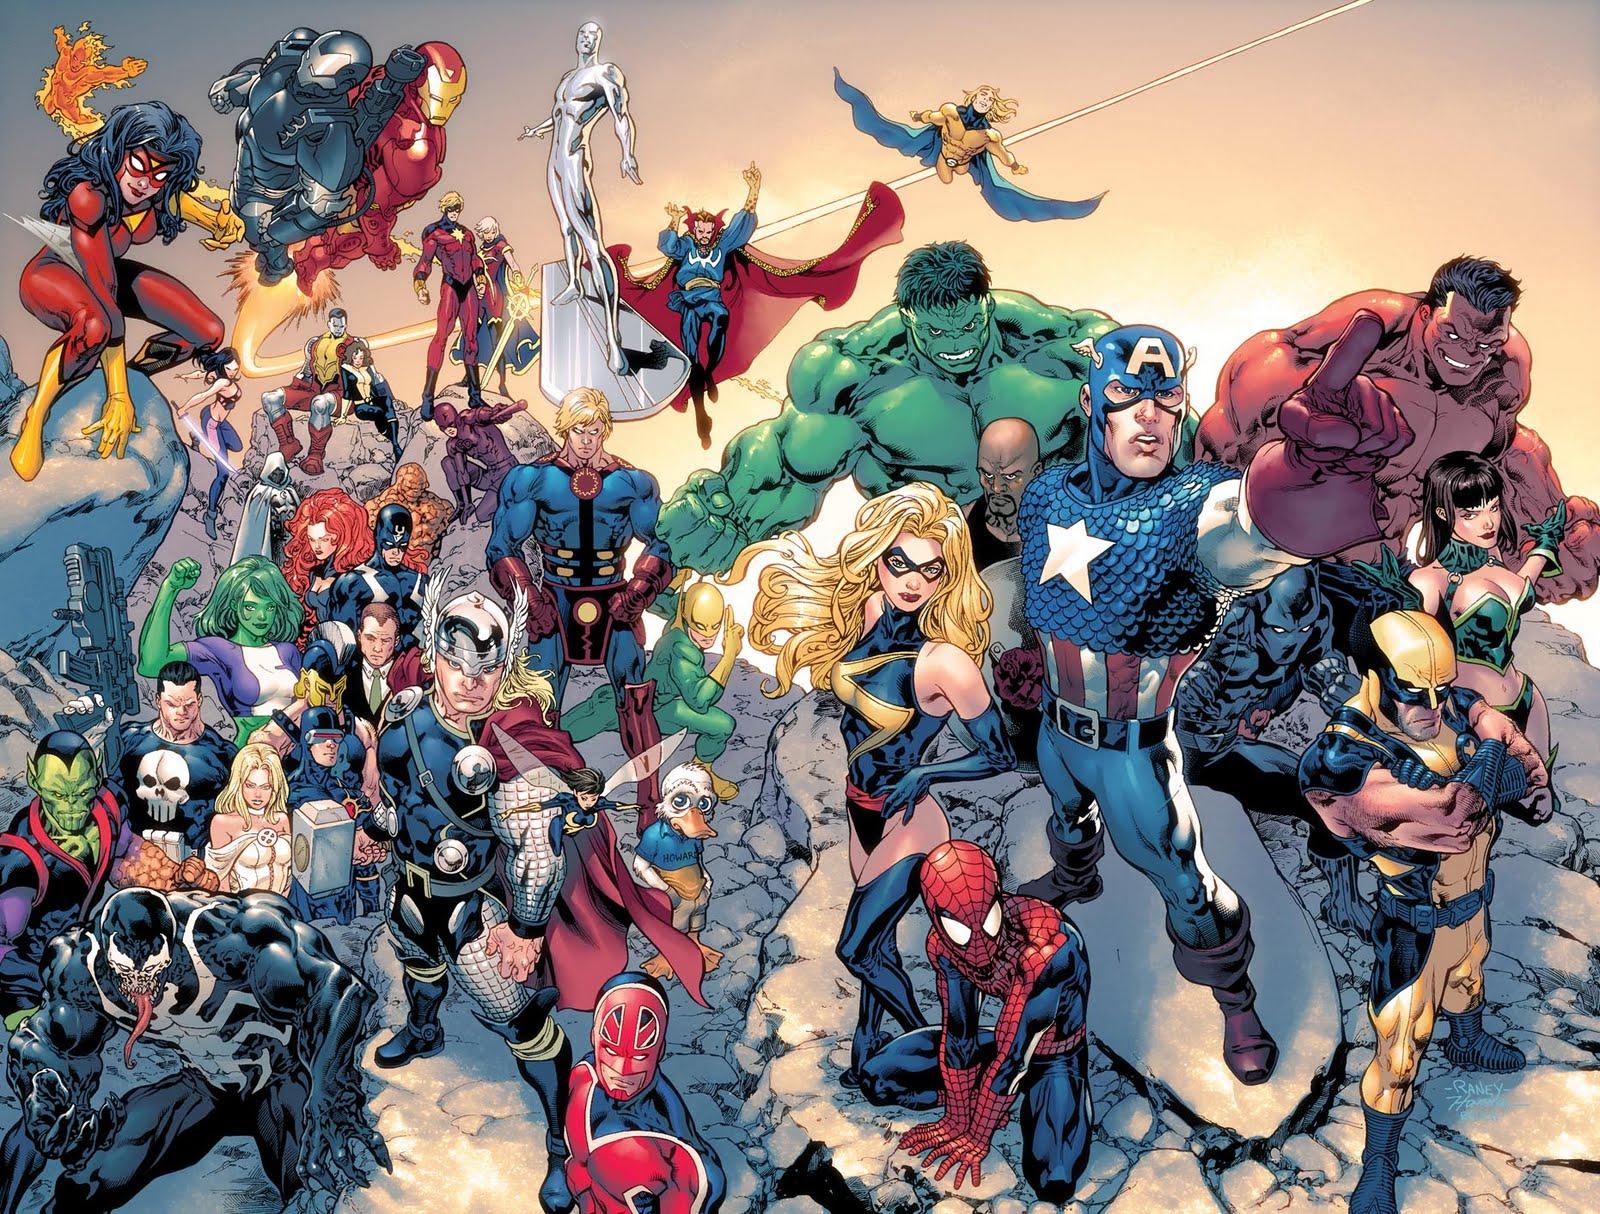 All Marvel Characters. That was what this WAS called. I sincerely